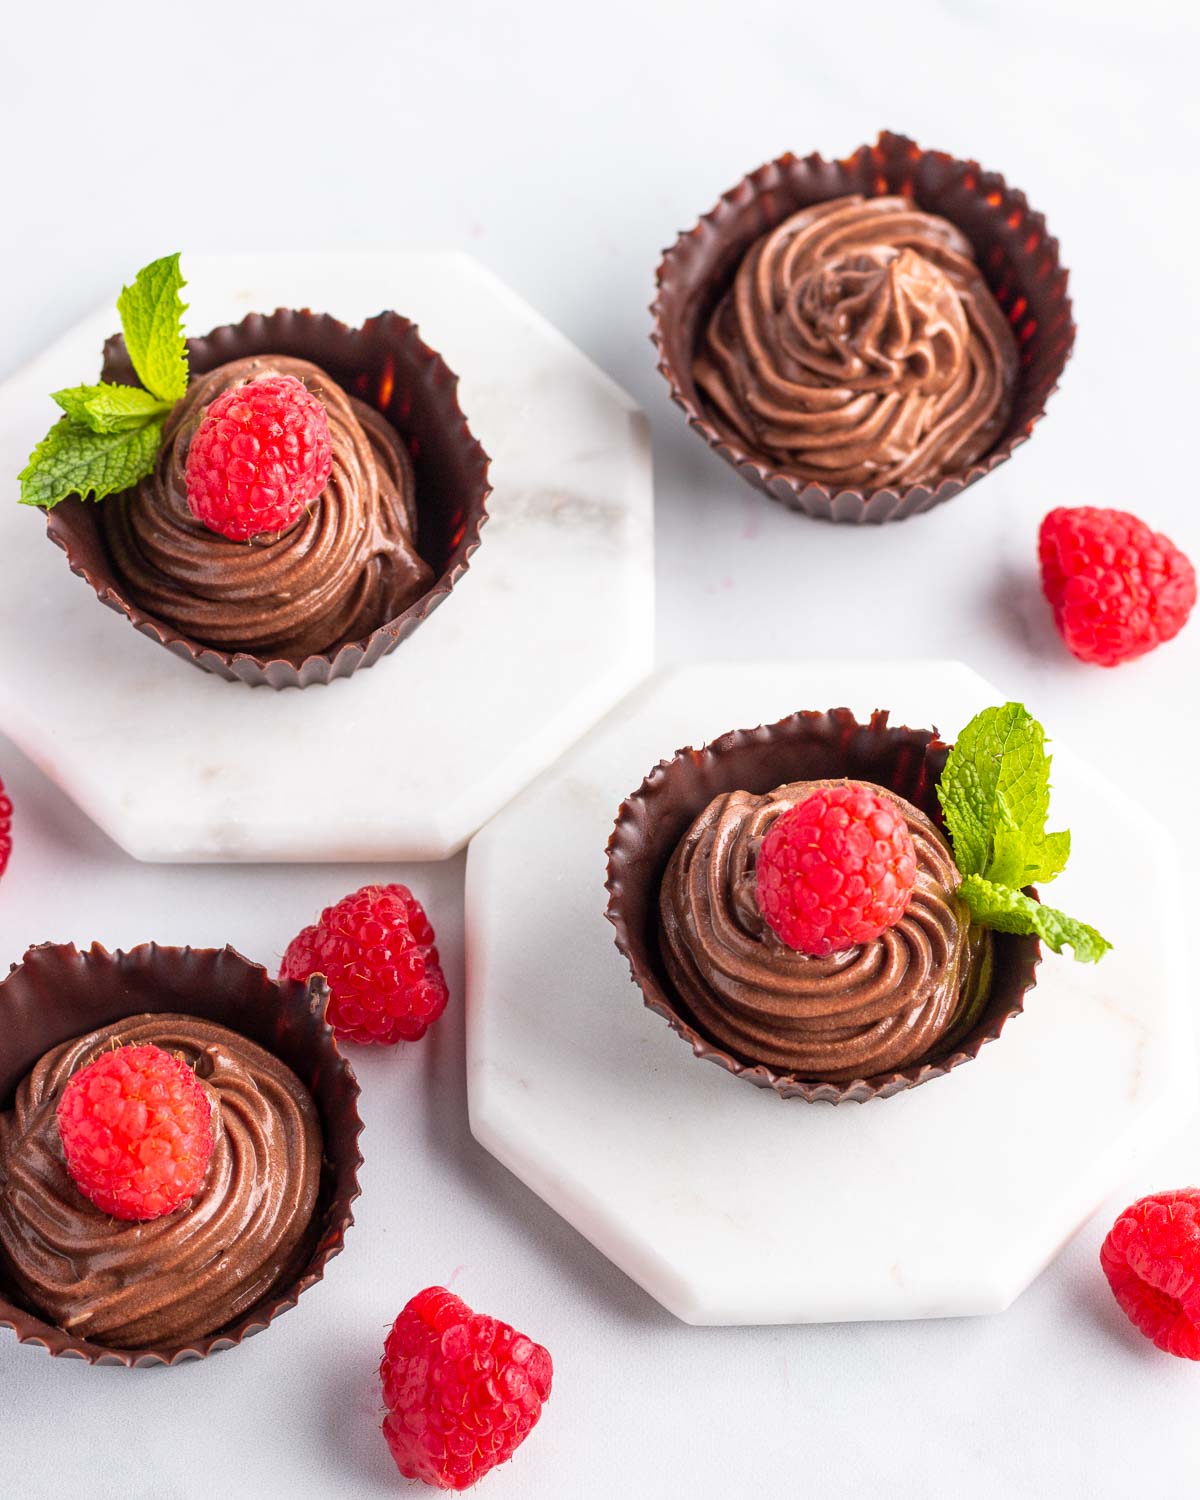  Keto Chocolate Mousse Cups